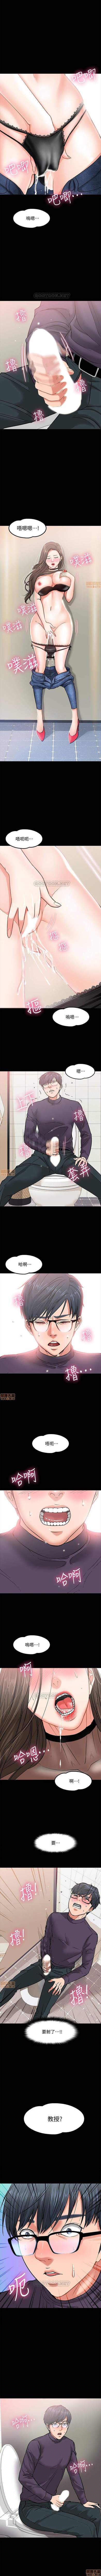 Juicy PROFESSOR, ARE YOU JUST GOING TO LOOK AT ME? | DESIRE SWAMP | 教授，你還等什麼? Ch. 3 [Chinese] Manhwa Bush - Page 7